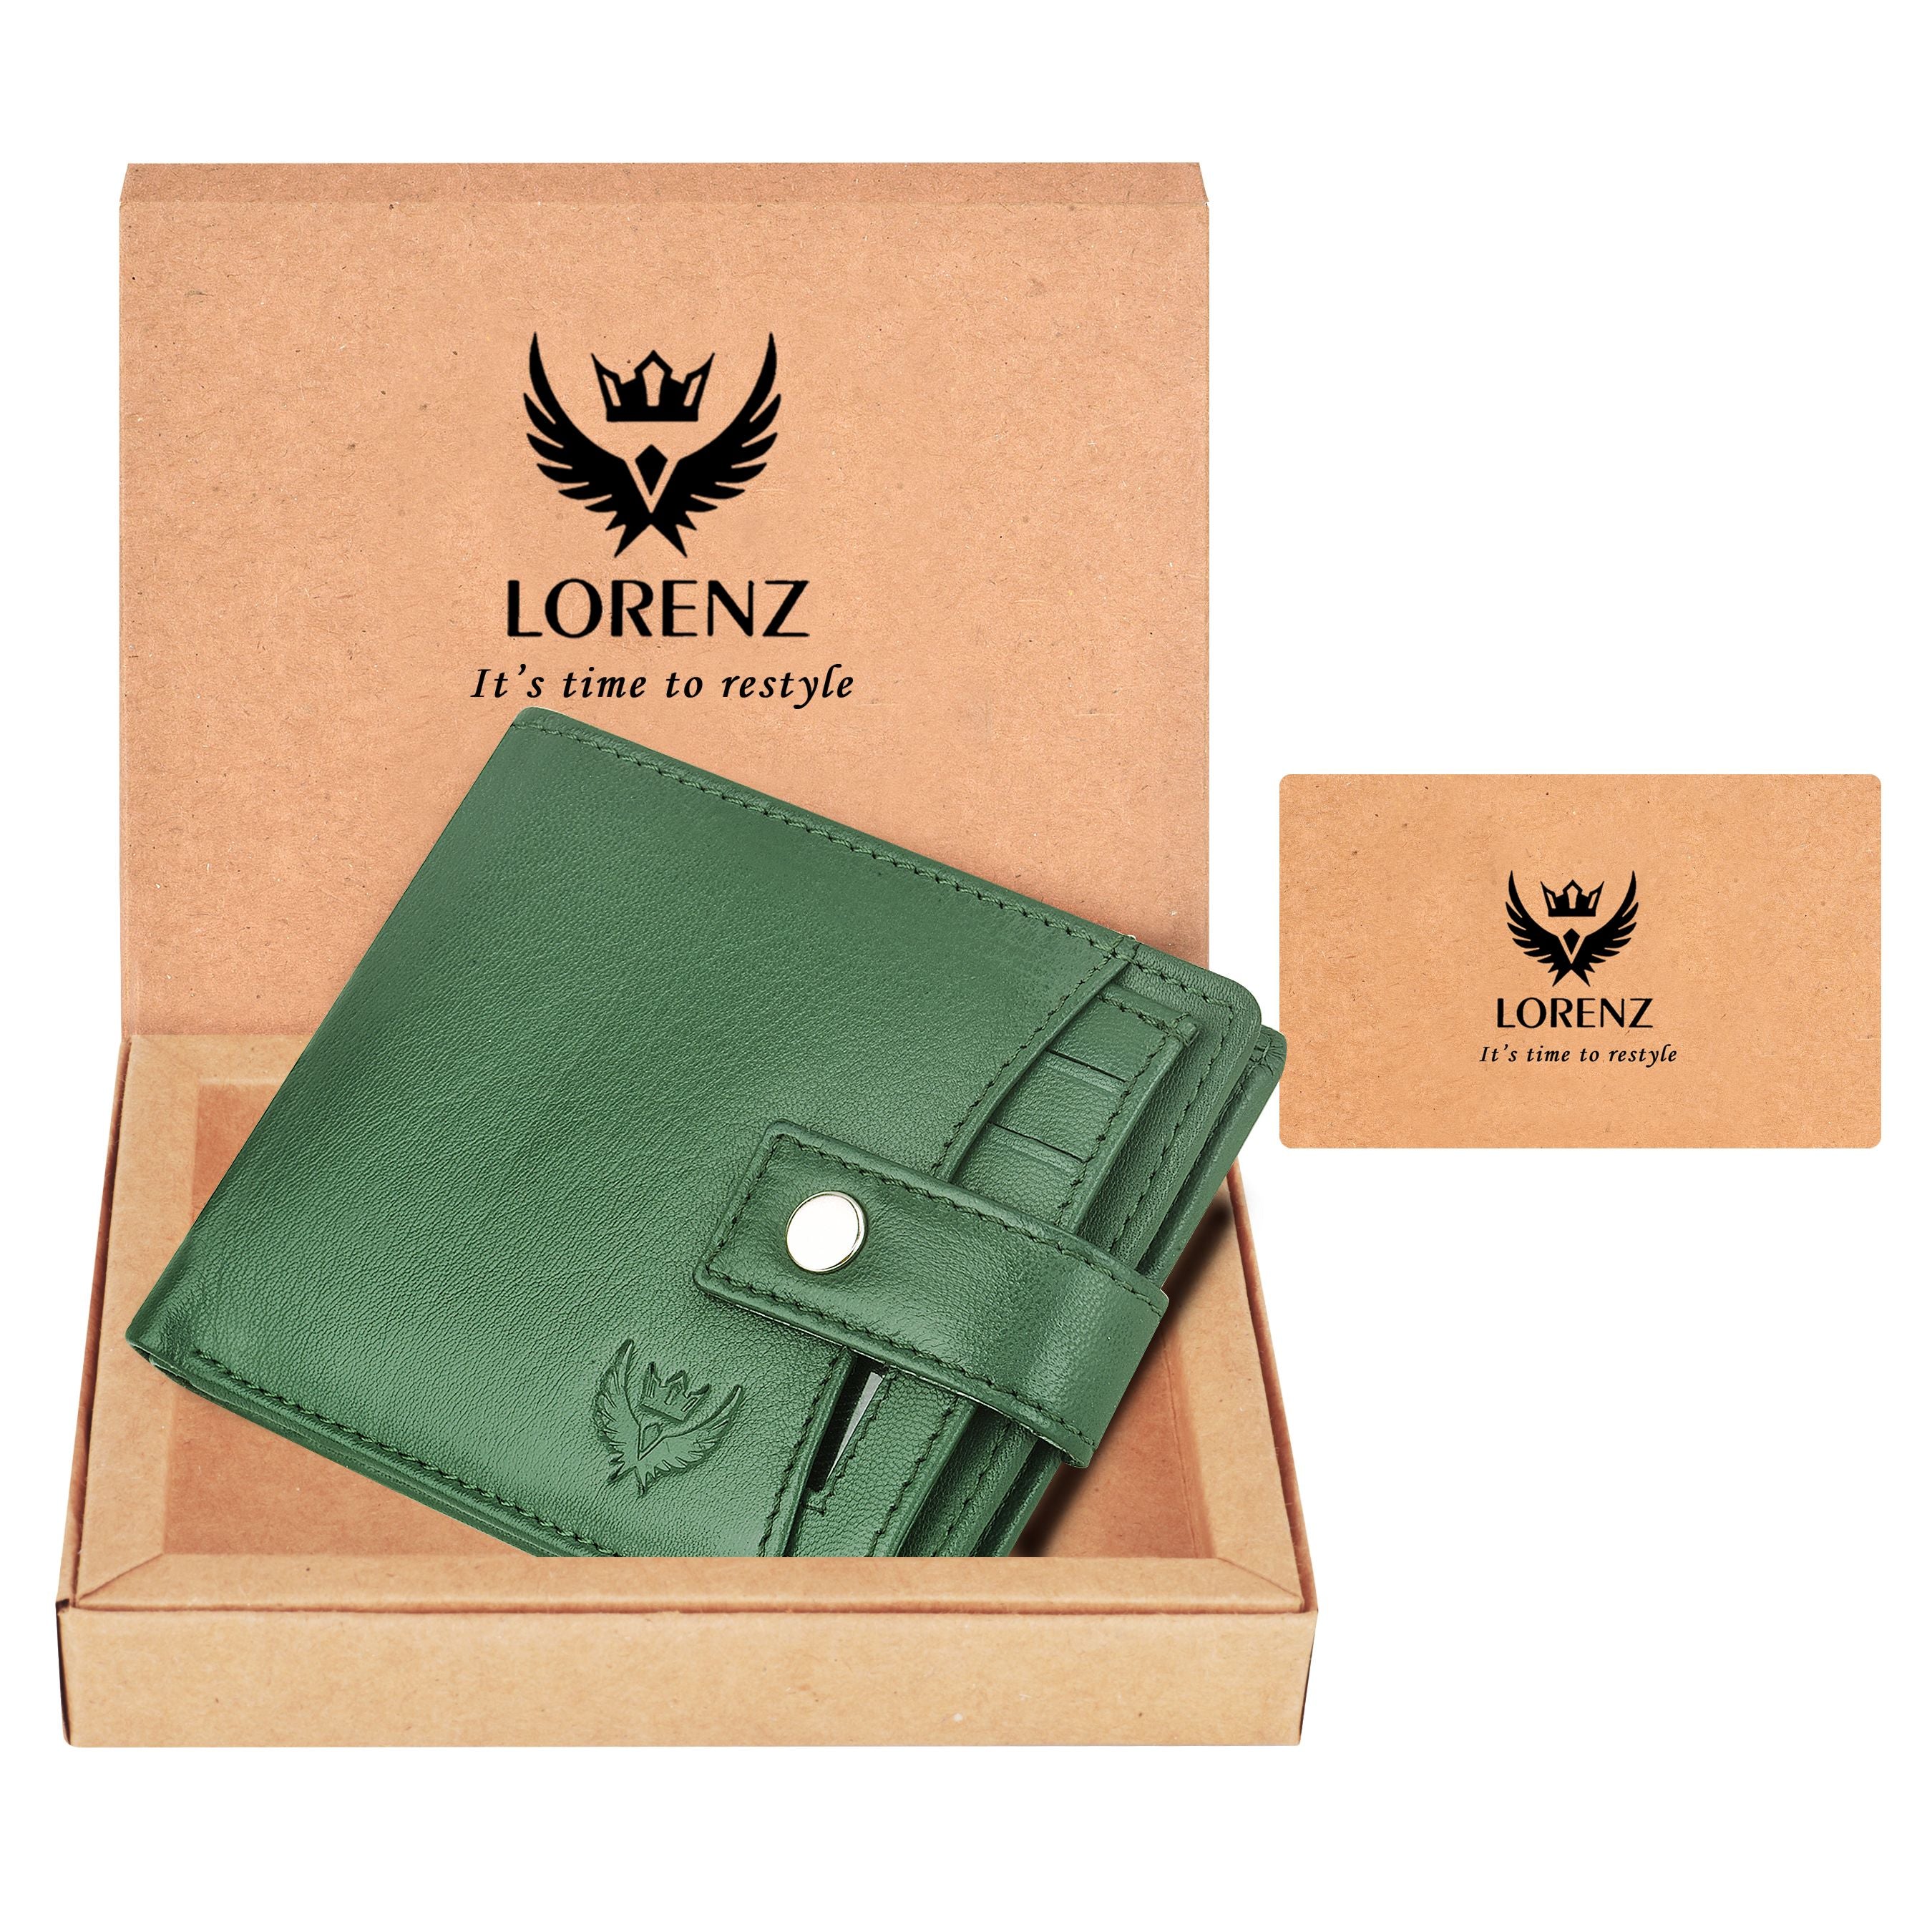 Buy Woodland Men Brown Solid Leather Two Fold Wallet - Wallets for Men  10965228 | Myntra